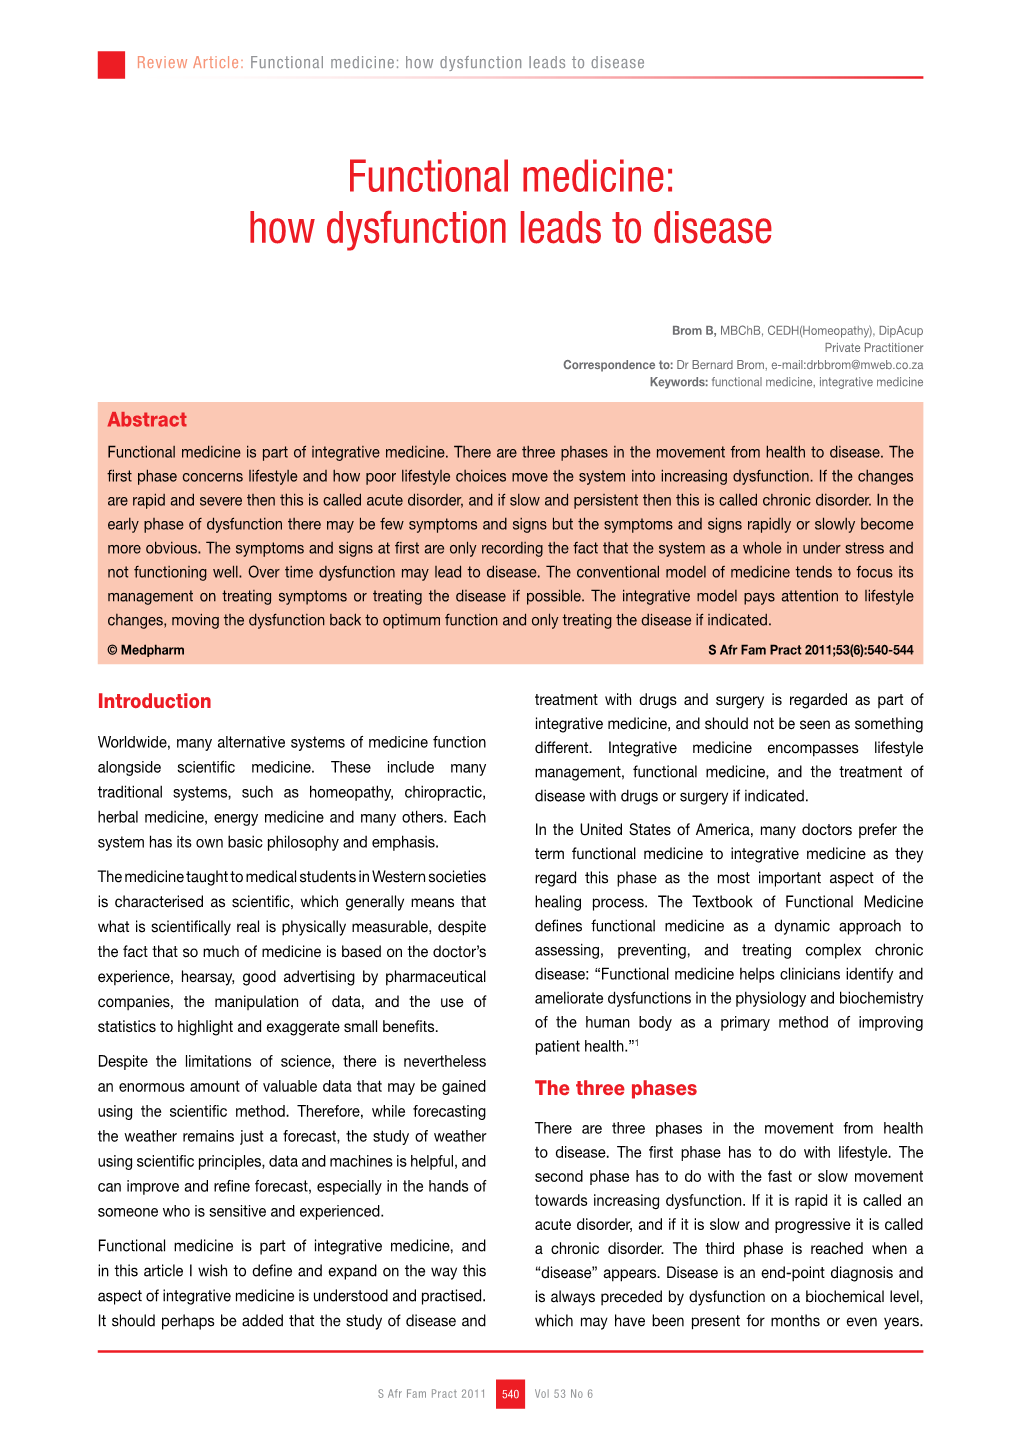 Functional Medicine: How Dysfunction Leads to Disease